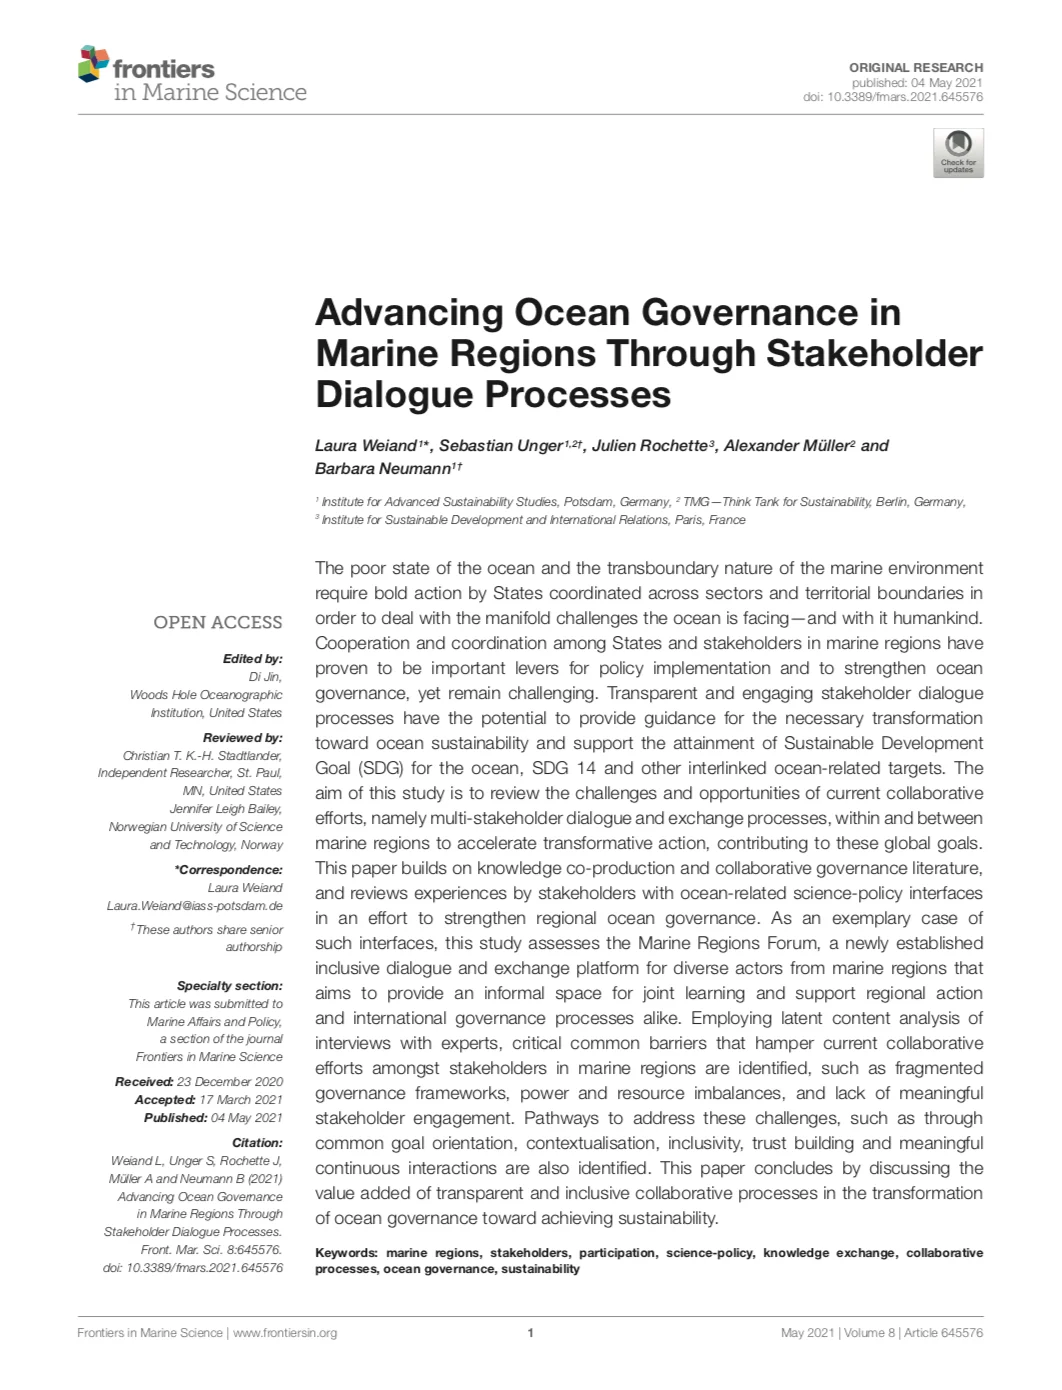 Advancing Ocean Governance in Marine Regions Through Stakeholder Dialogue Processes